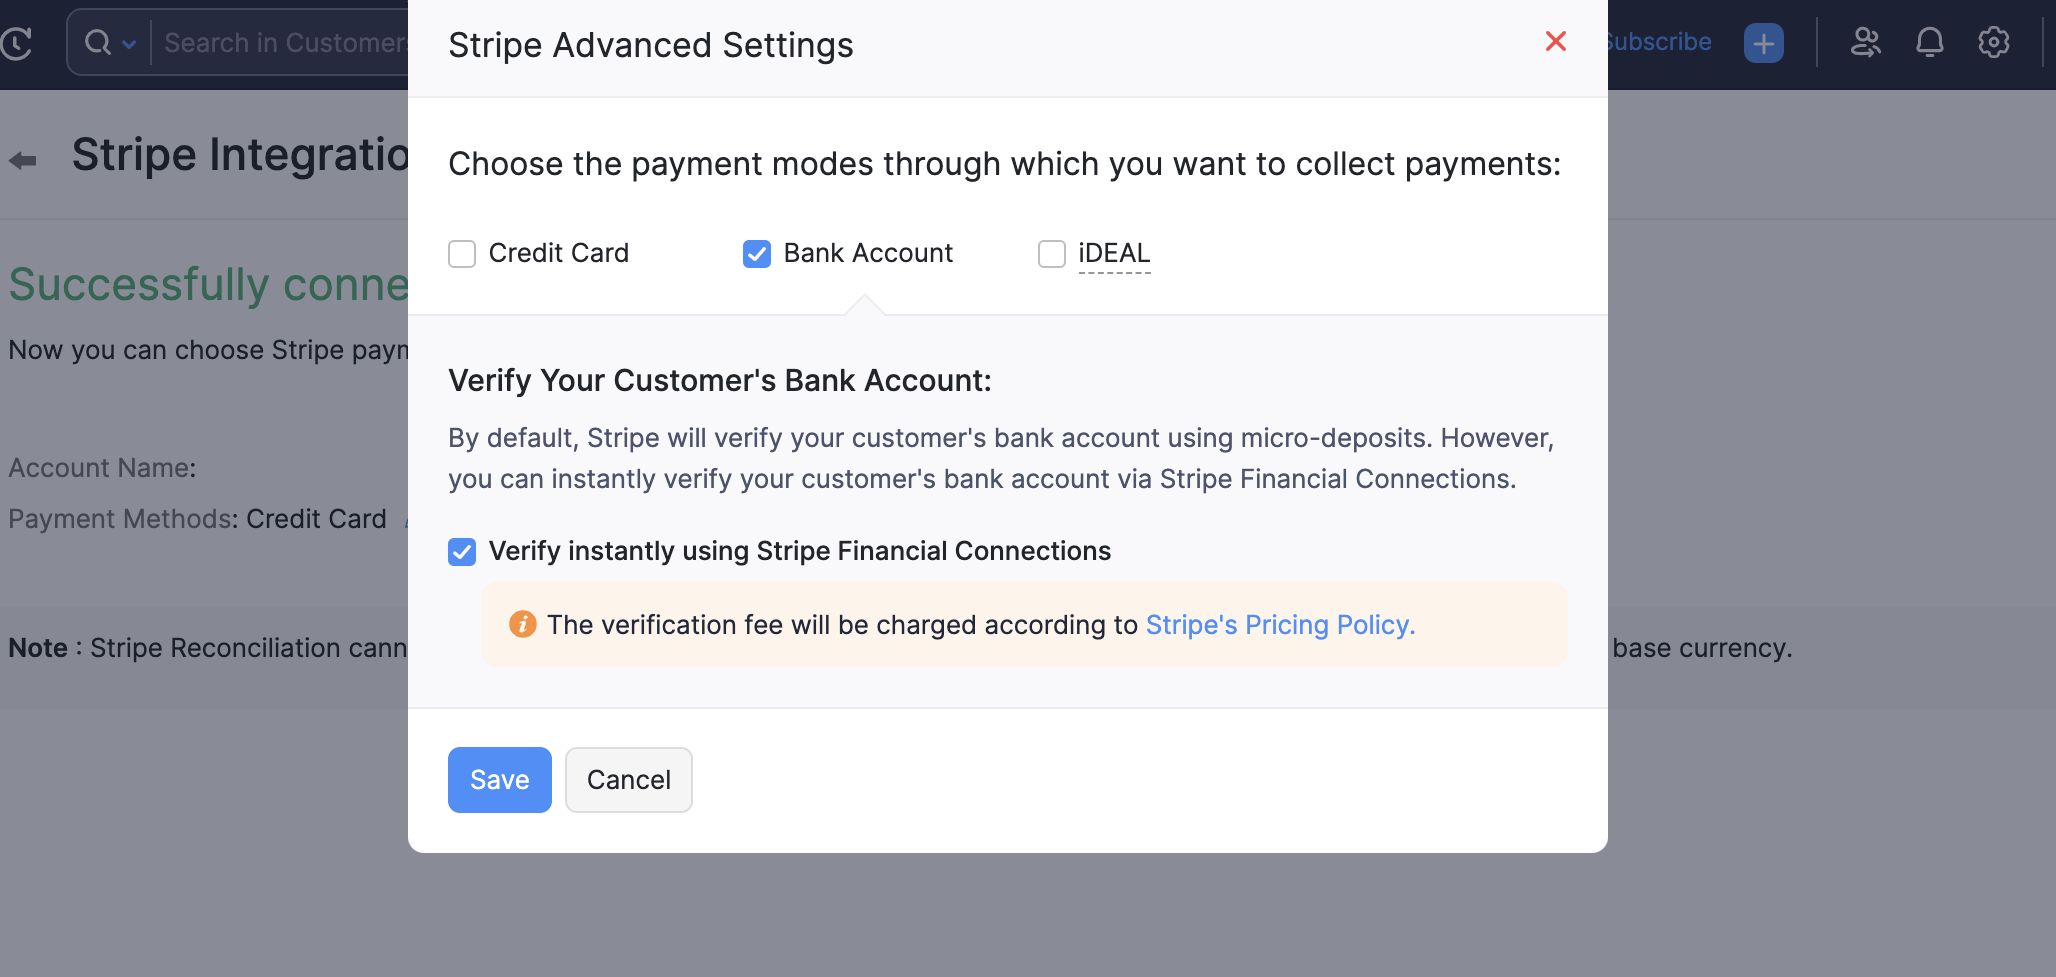 Enable Stripe Financial Connections